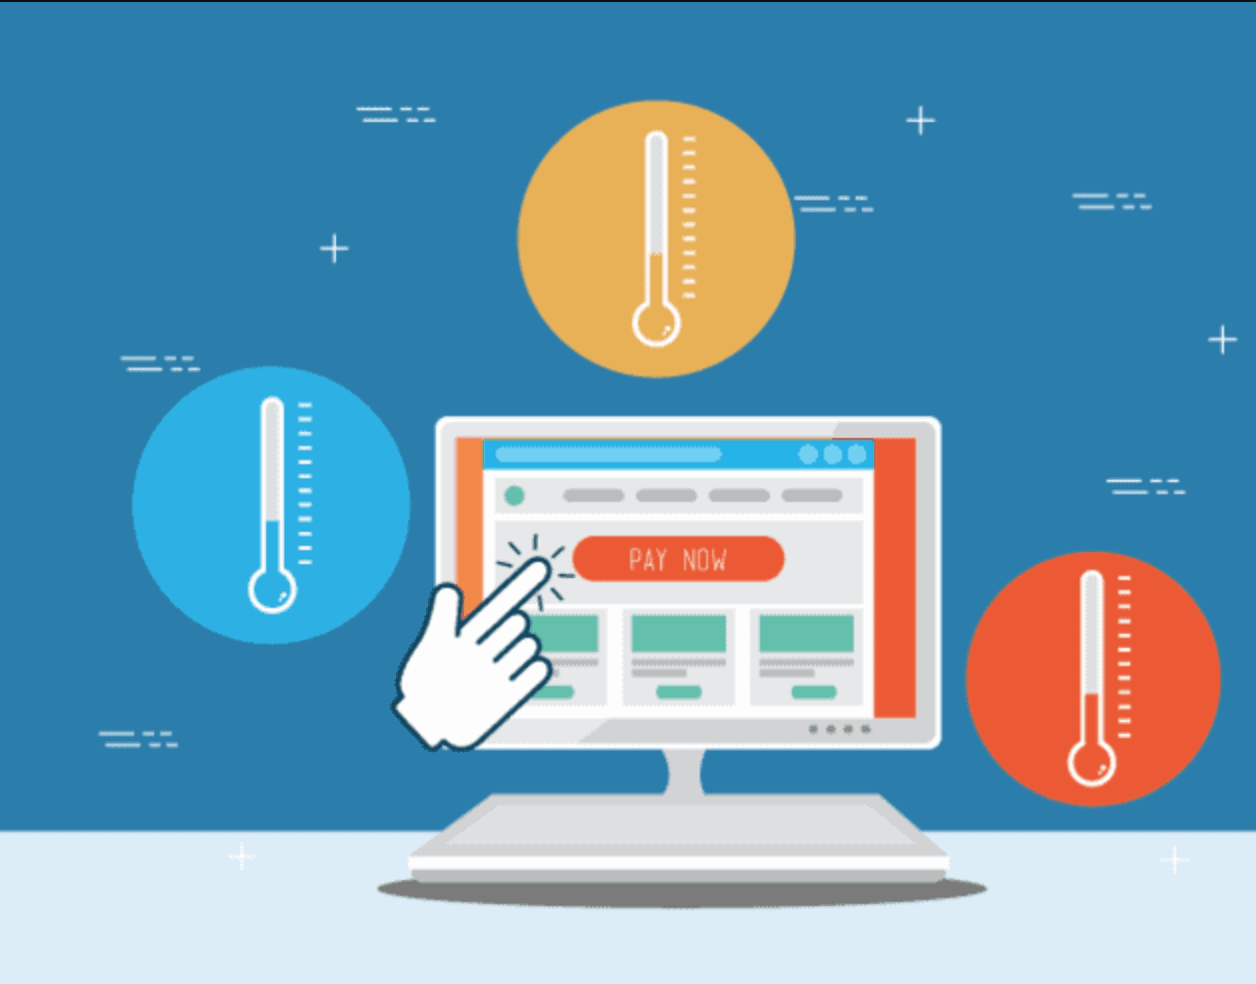 How Traffic Temperature Can Affect Your Website Sales